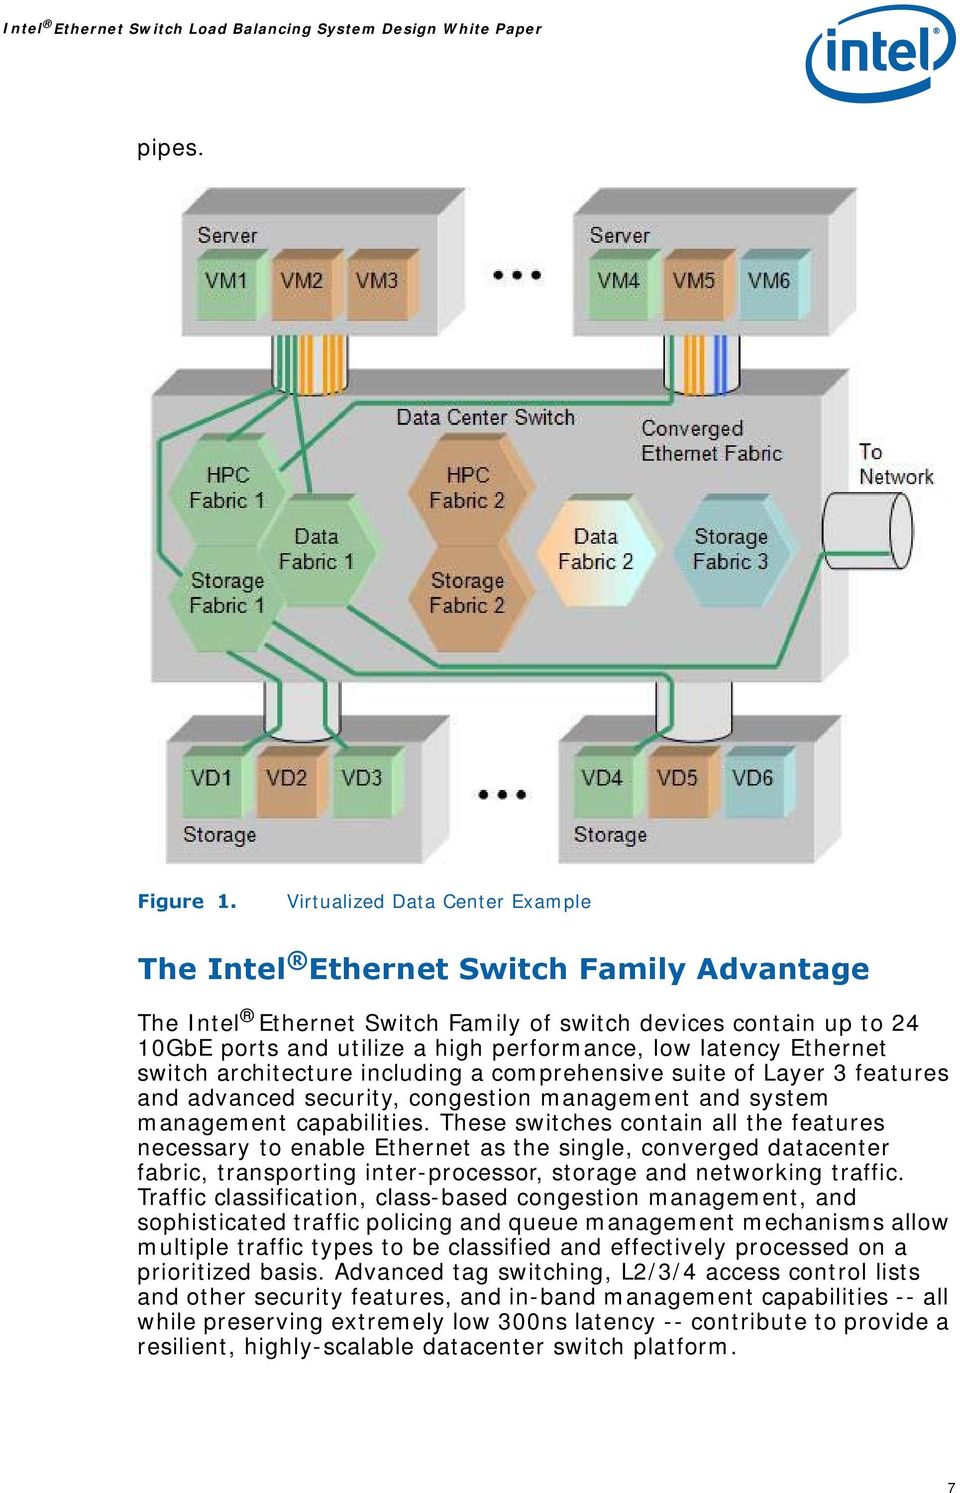 Ethernet switch architecture including a comprehensive suite of Layer 3 features and advanced security, congestion management and system management capabilities.